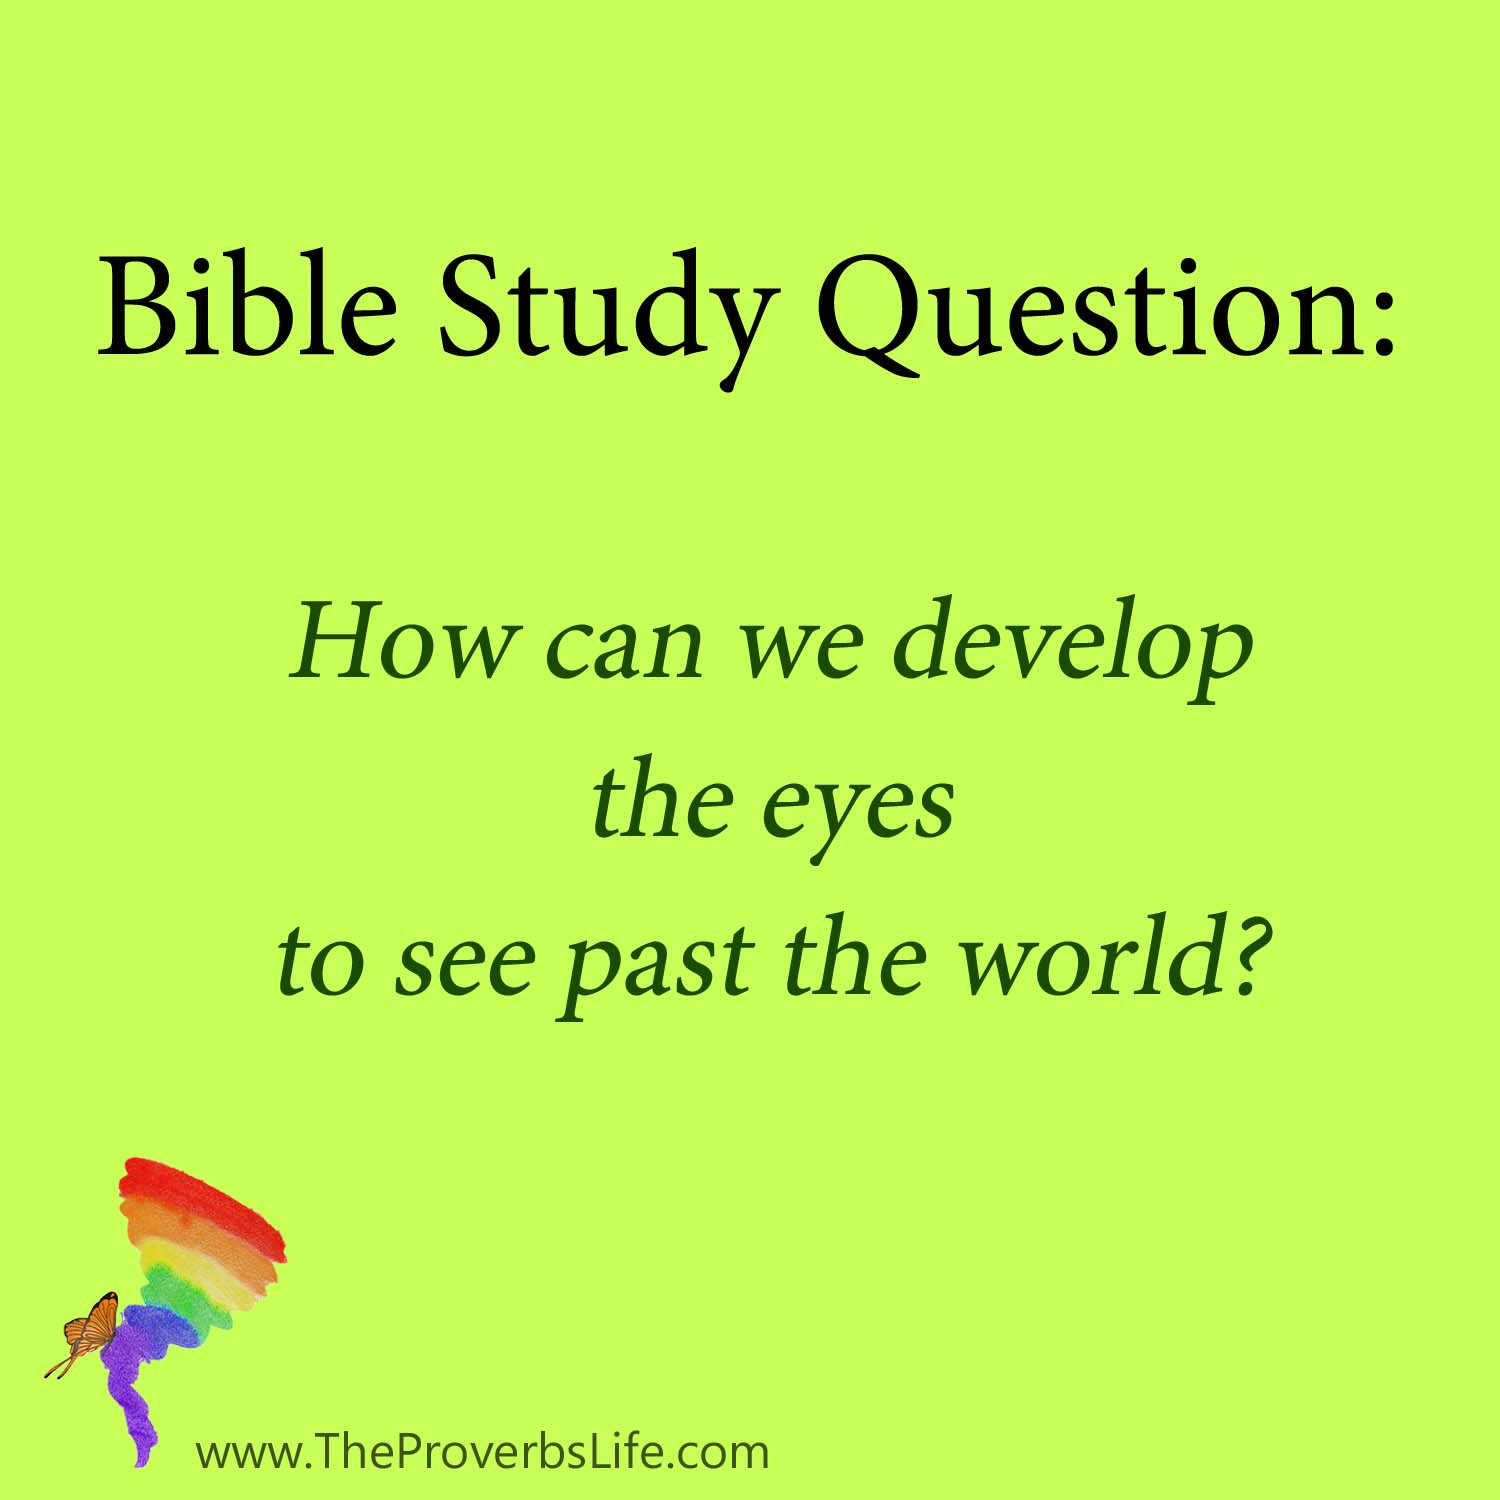 bible Study Question - see past the world